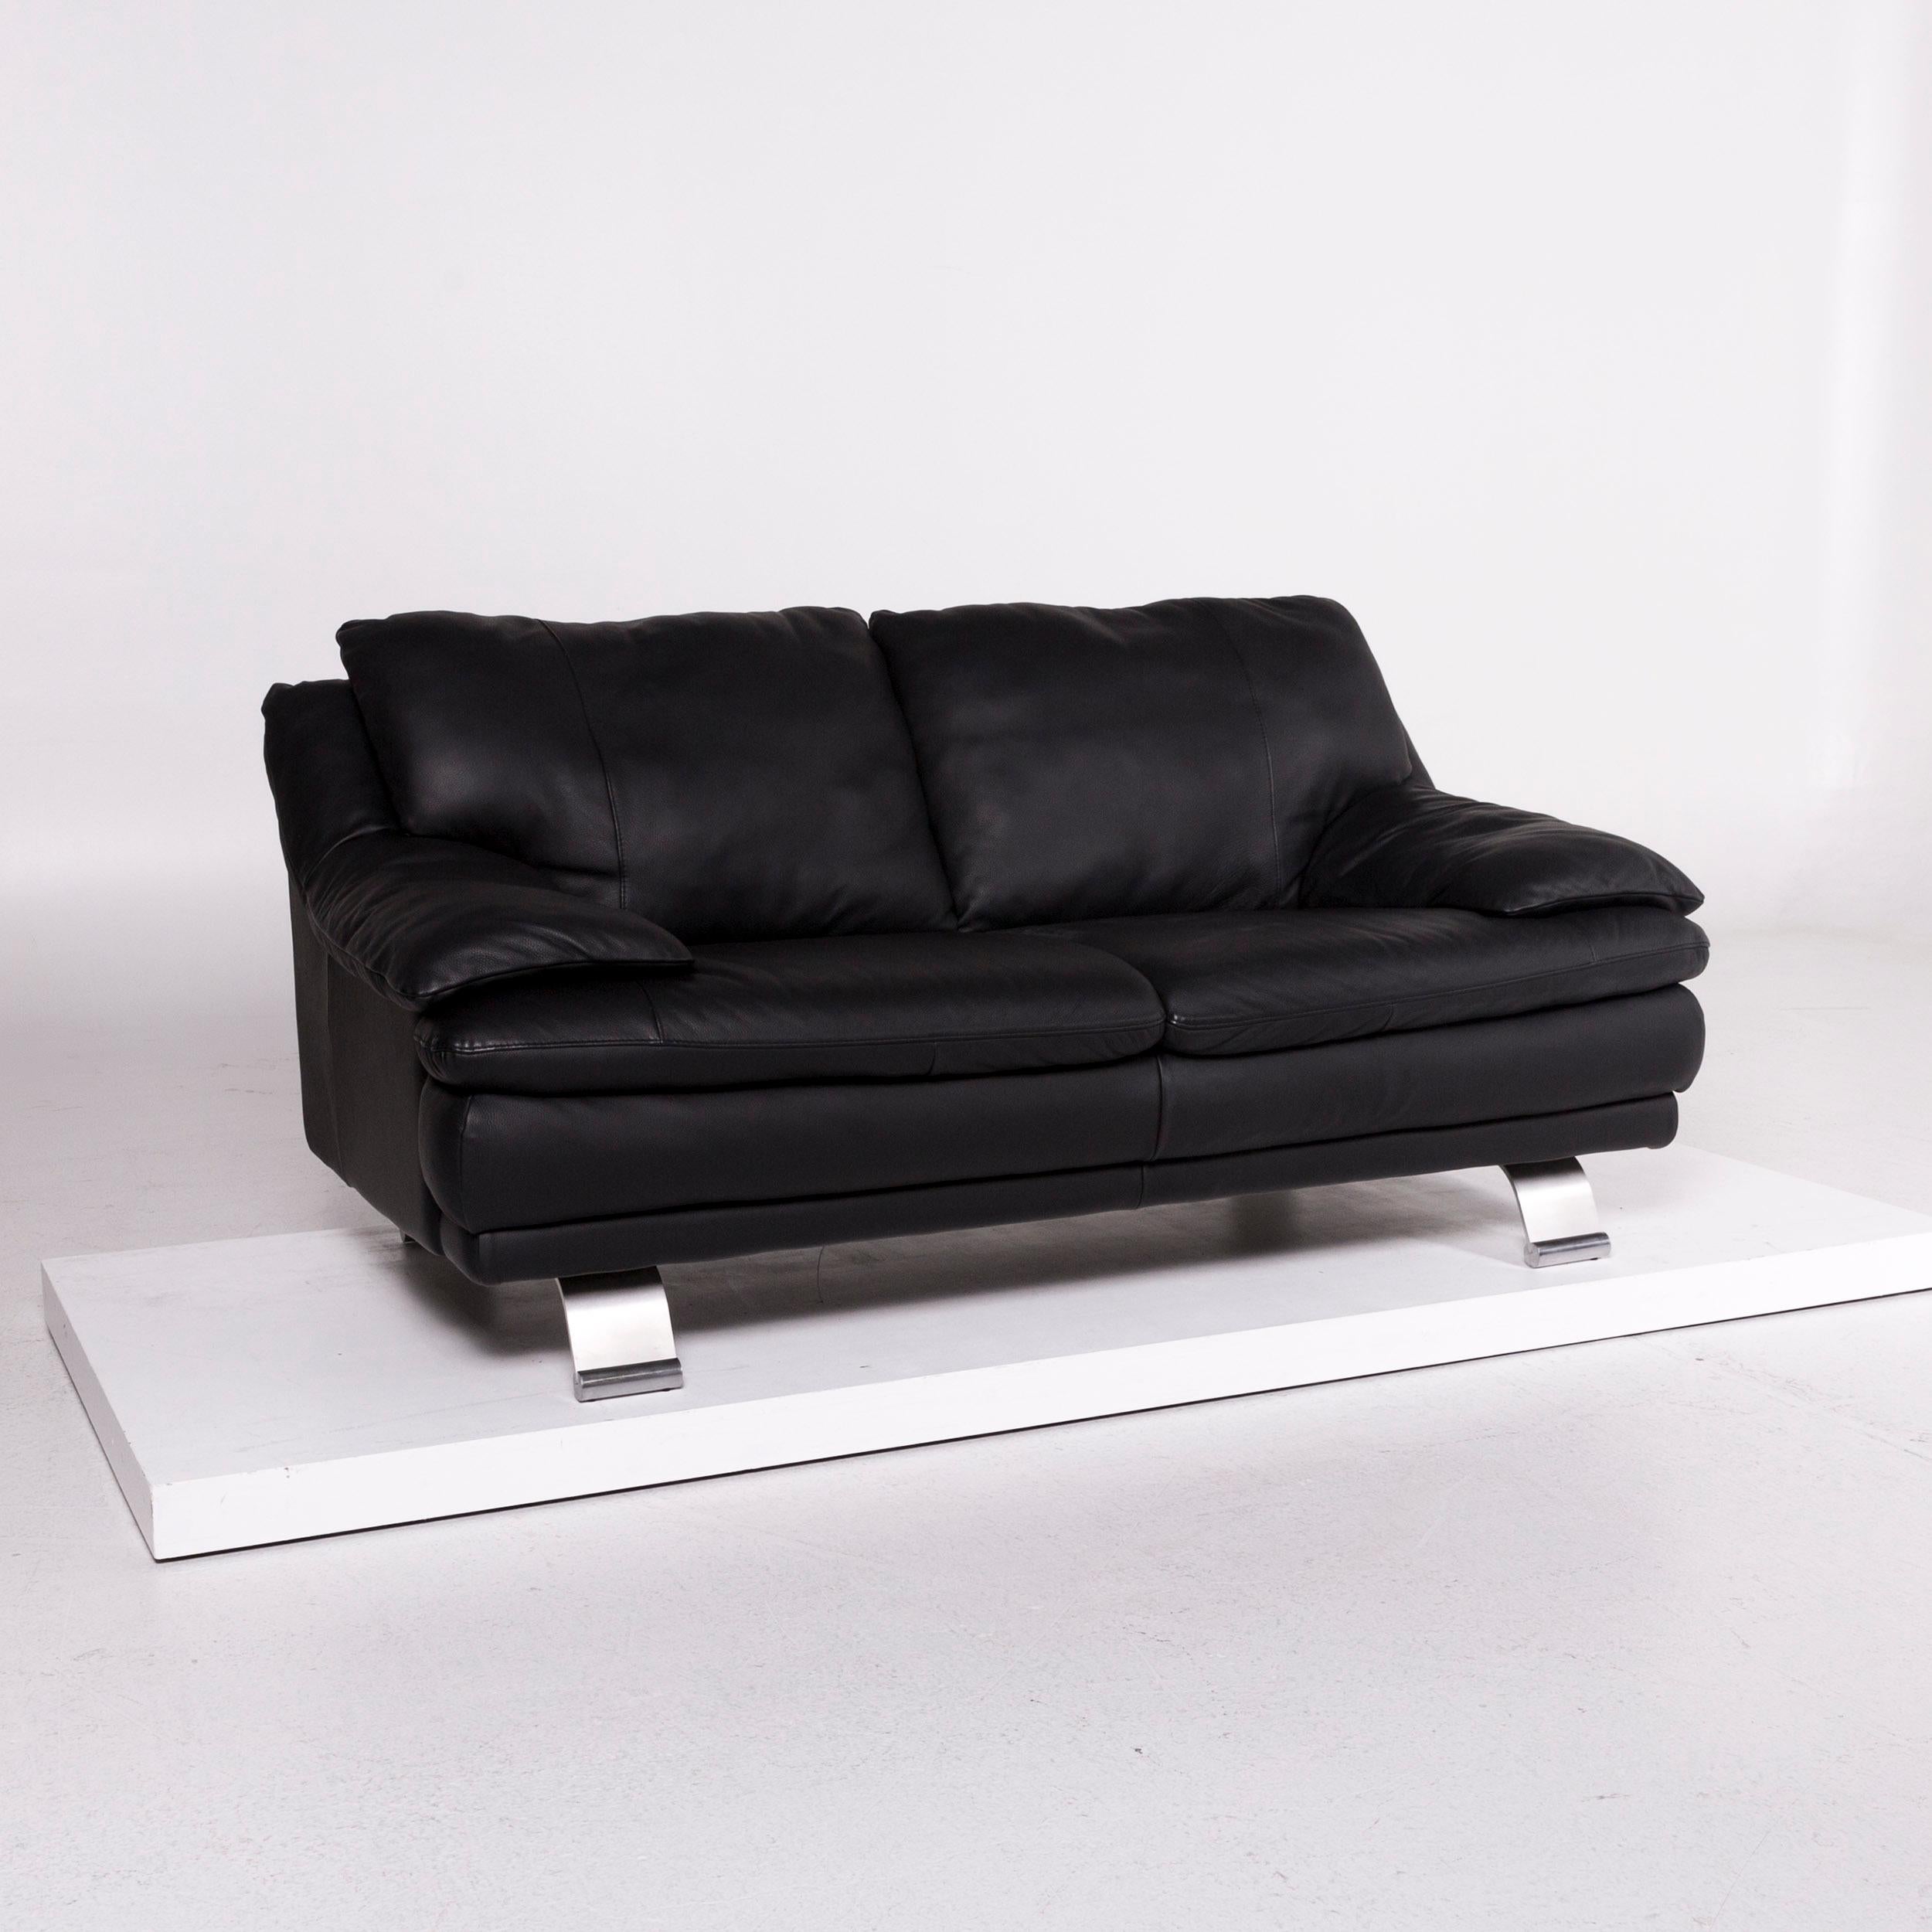 We bring to you an Italsofa leather sofa black two-seat couch.


 Product measurements in centimeters:
 

Depth 98
Width 180
Height 88
Seat-height 46
Rest-height 55
Seat-depth 56
Seat-width 113
Back-height 42.
 